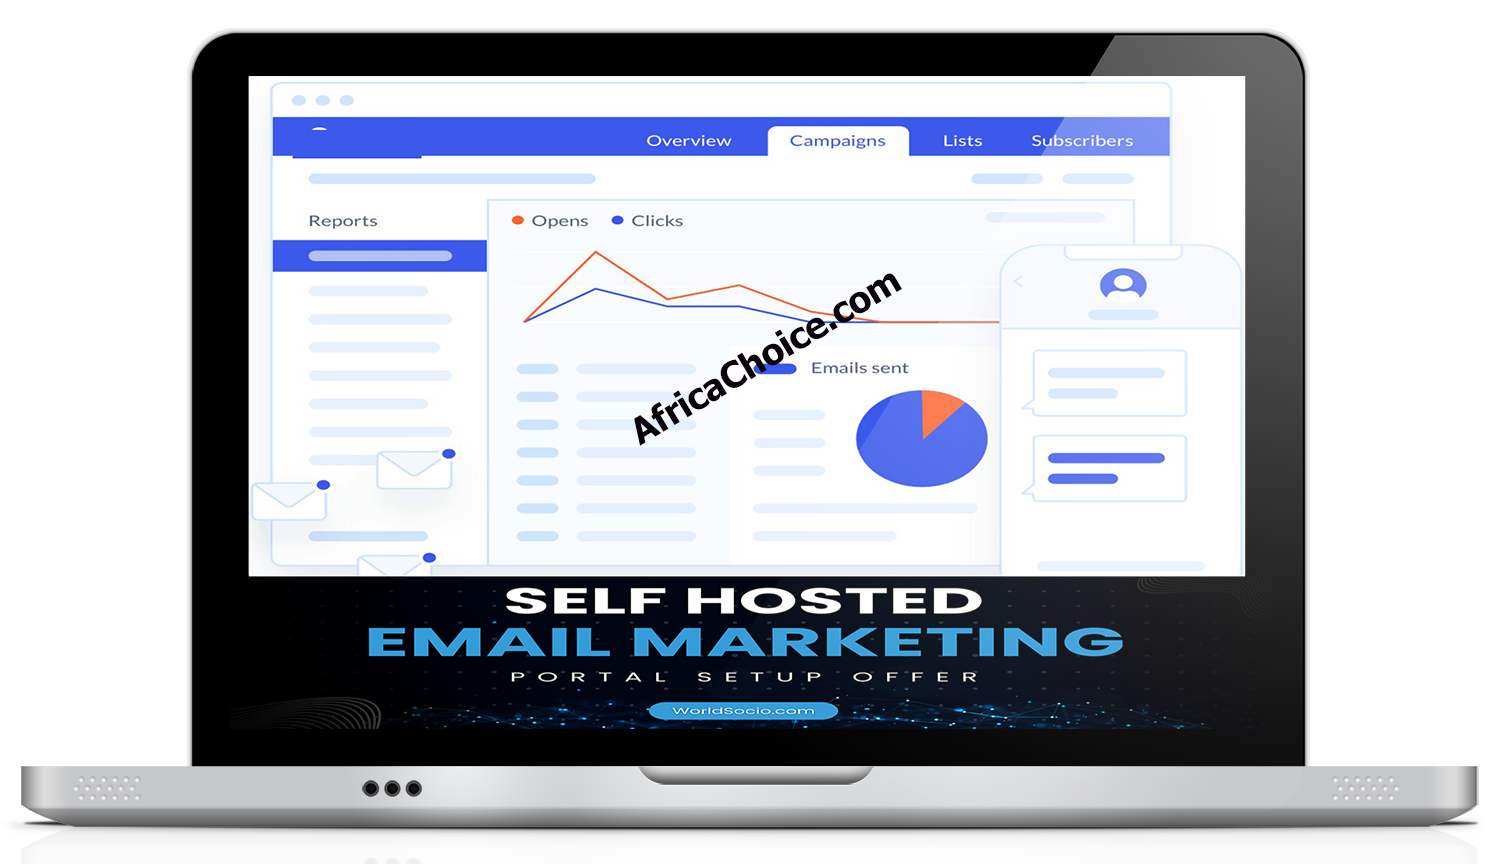 self-hosted-email-marketing-portal-setup-offer-by-mbonu-watson-png.1595